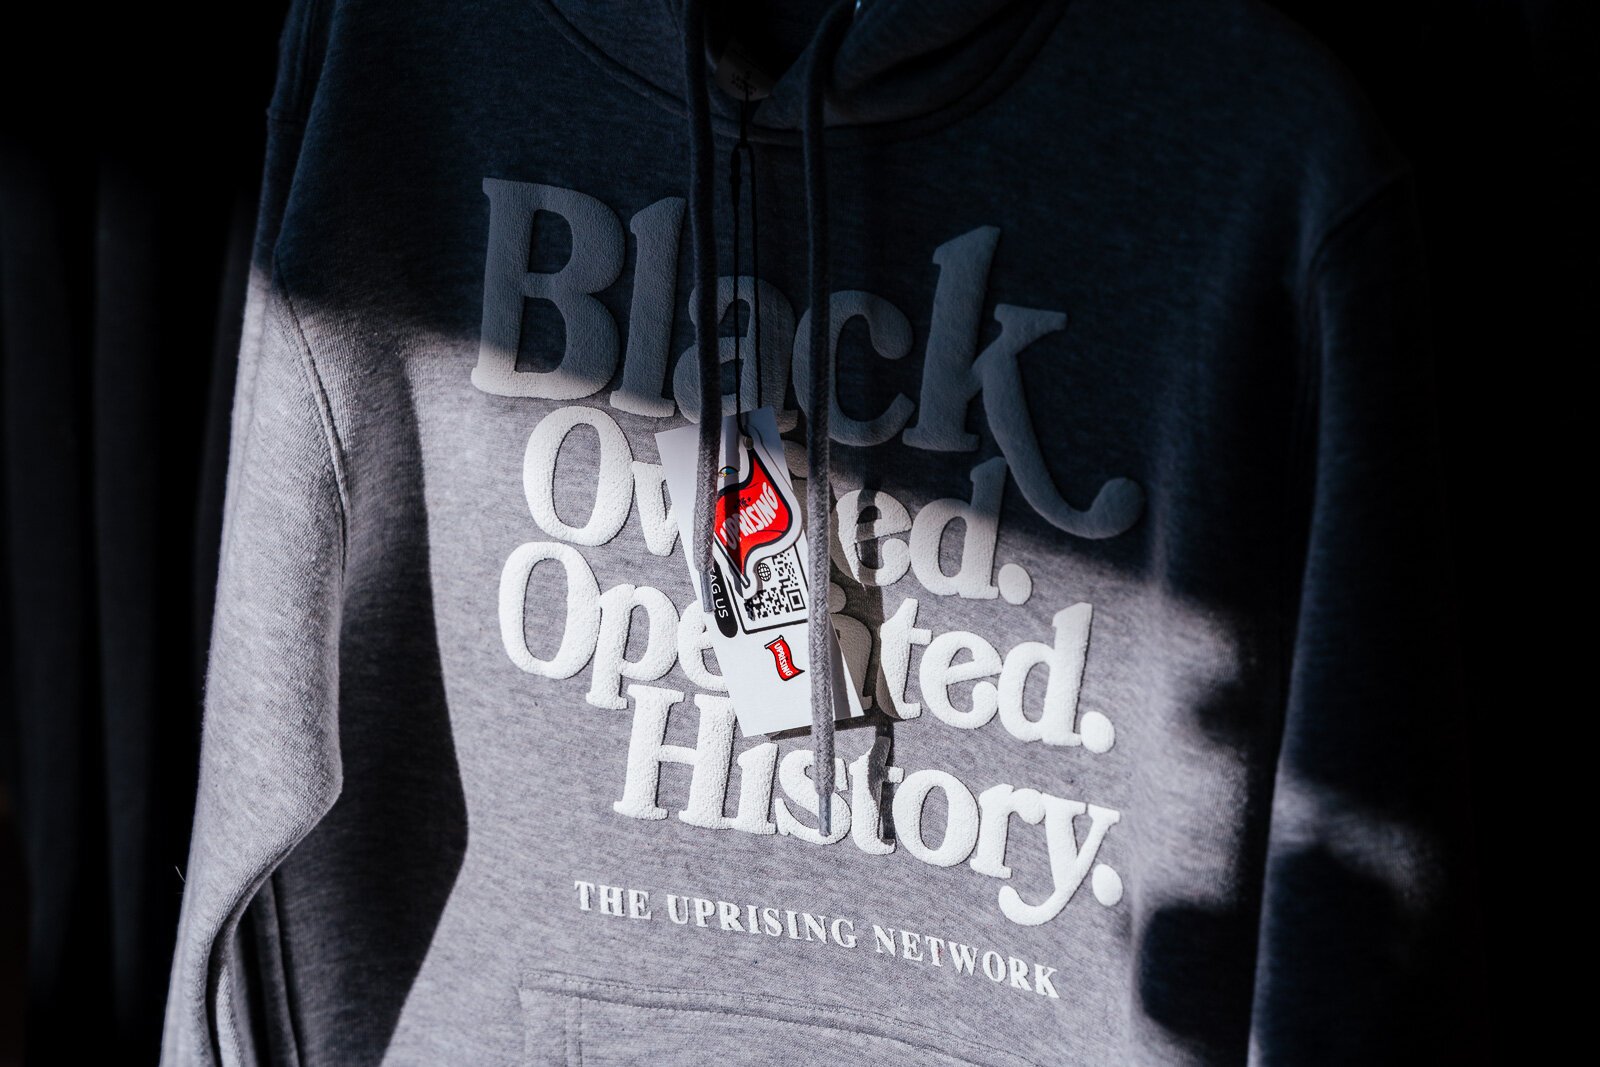 Hoodies from the Uprising Network on sale at Neighborhood Grocery.